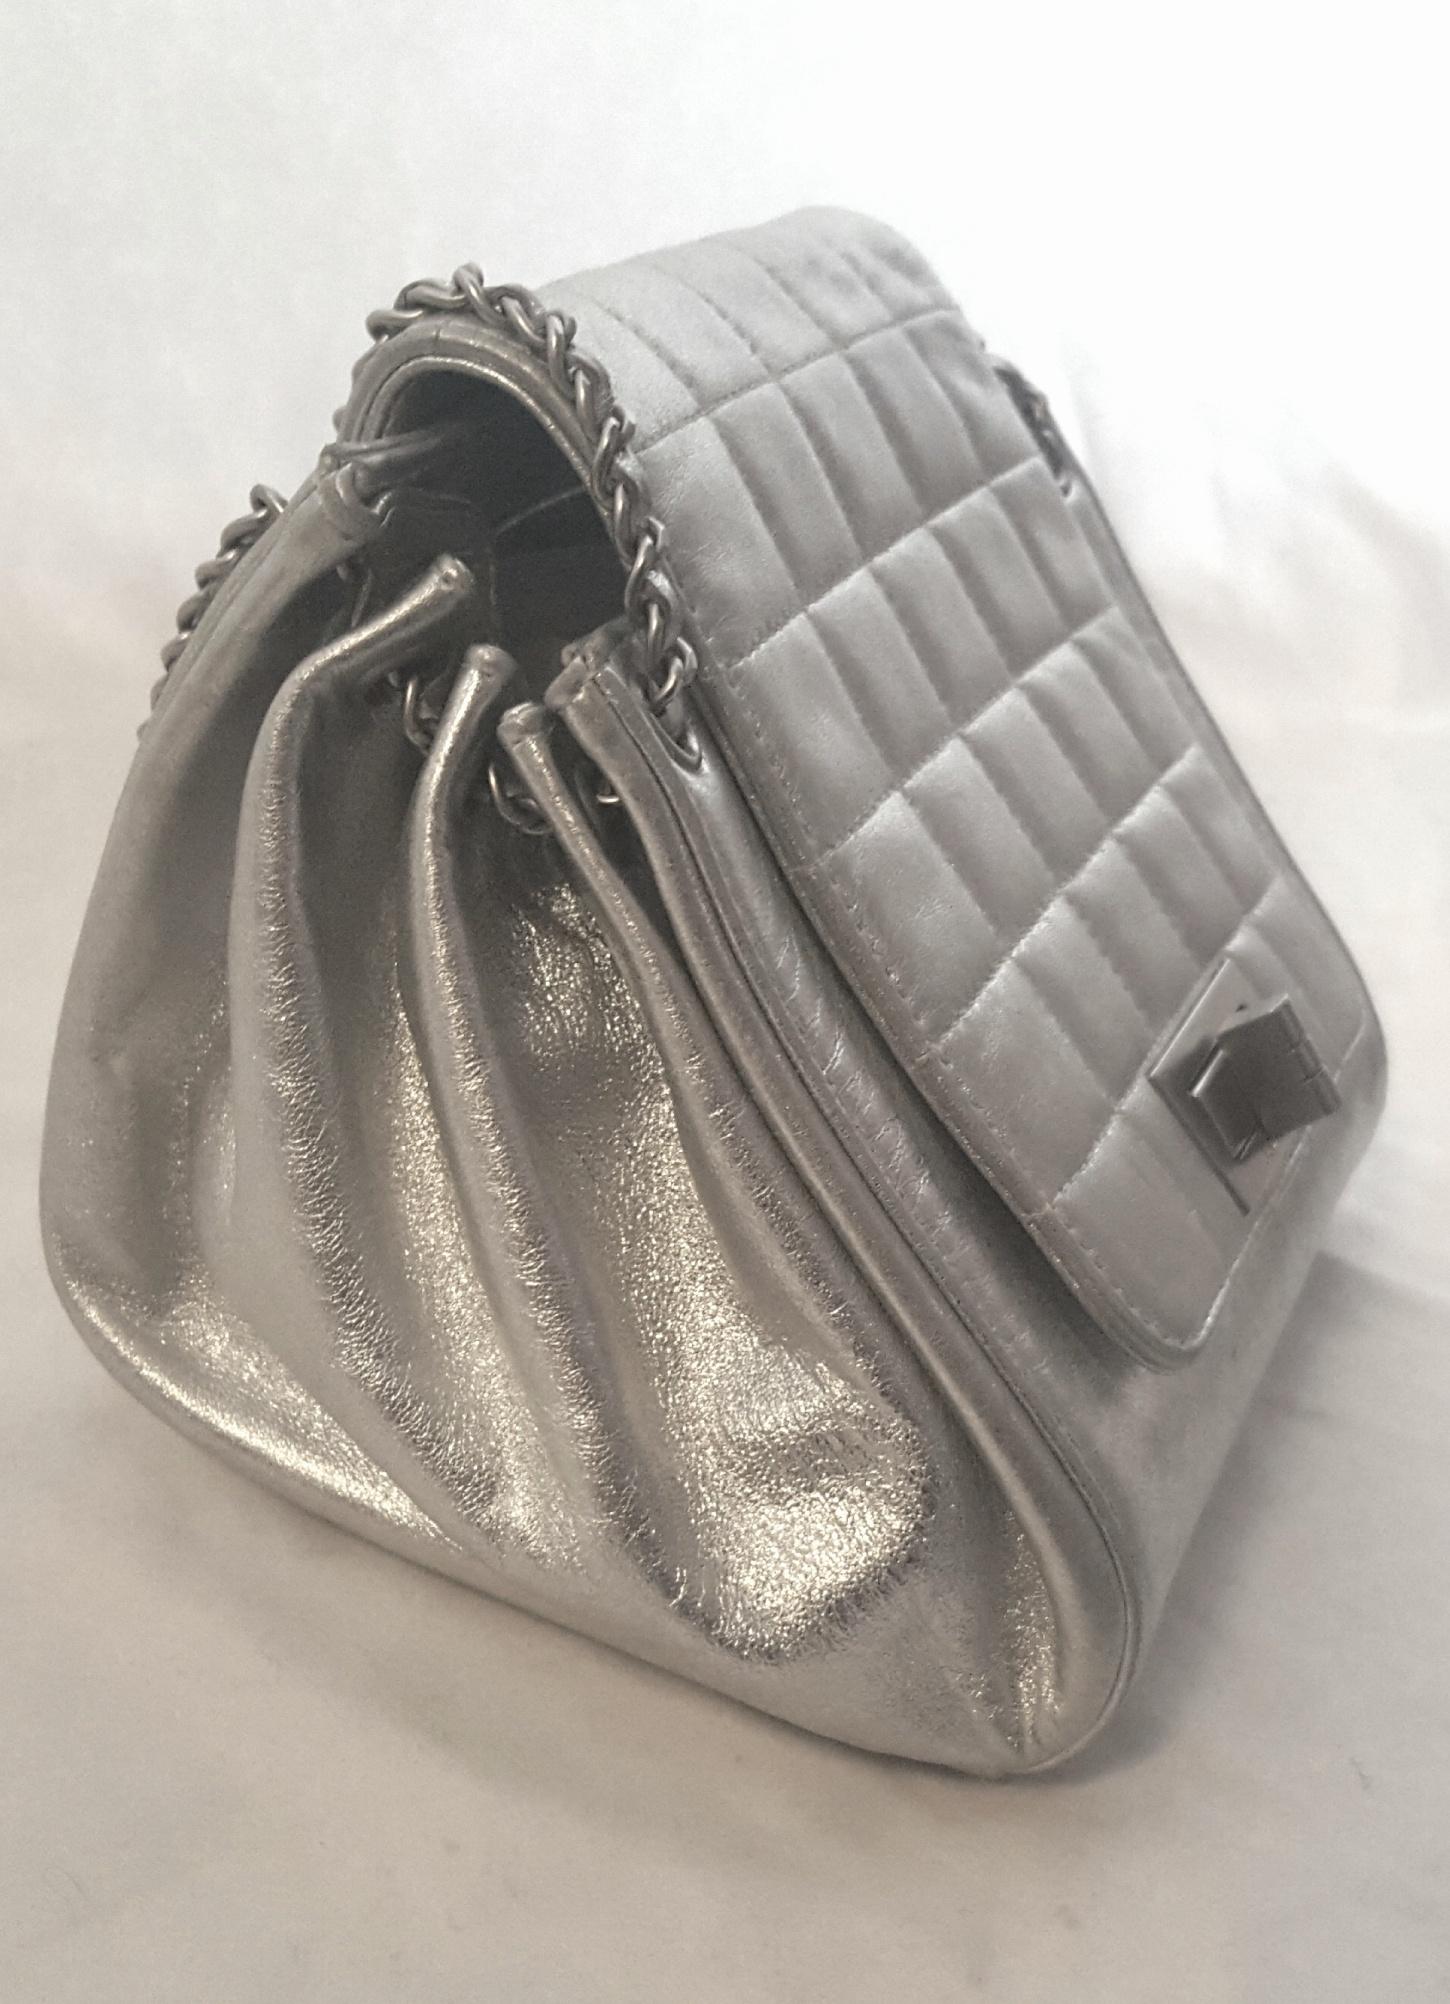 Chanel Mademoiselle Silver Metallic Square Quilt Chain Link Strap Mini Bag In Excellent Condition For Sale In Palm Beach, FL